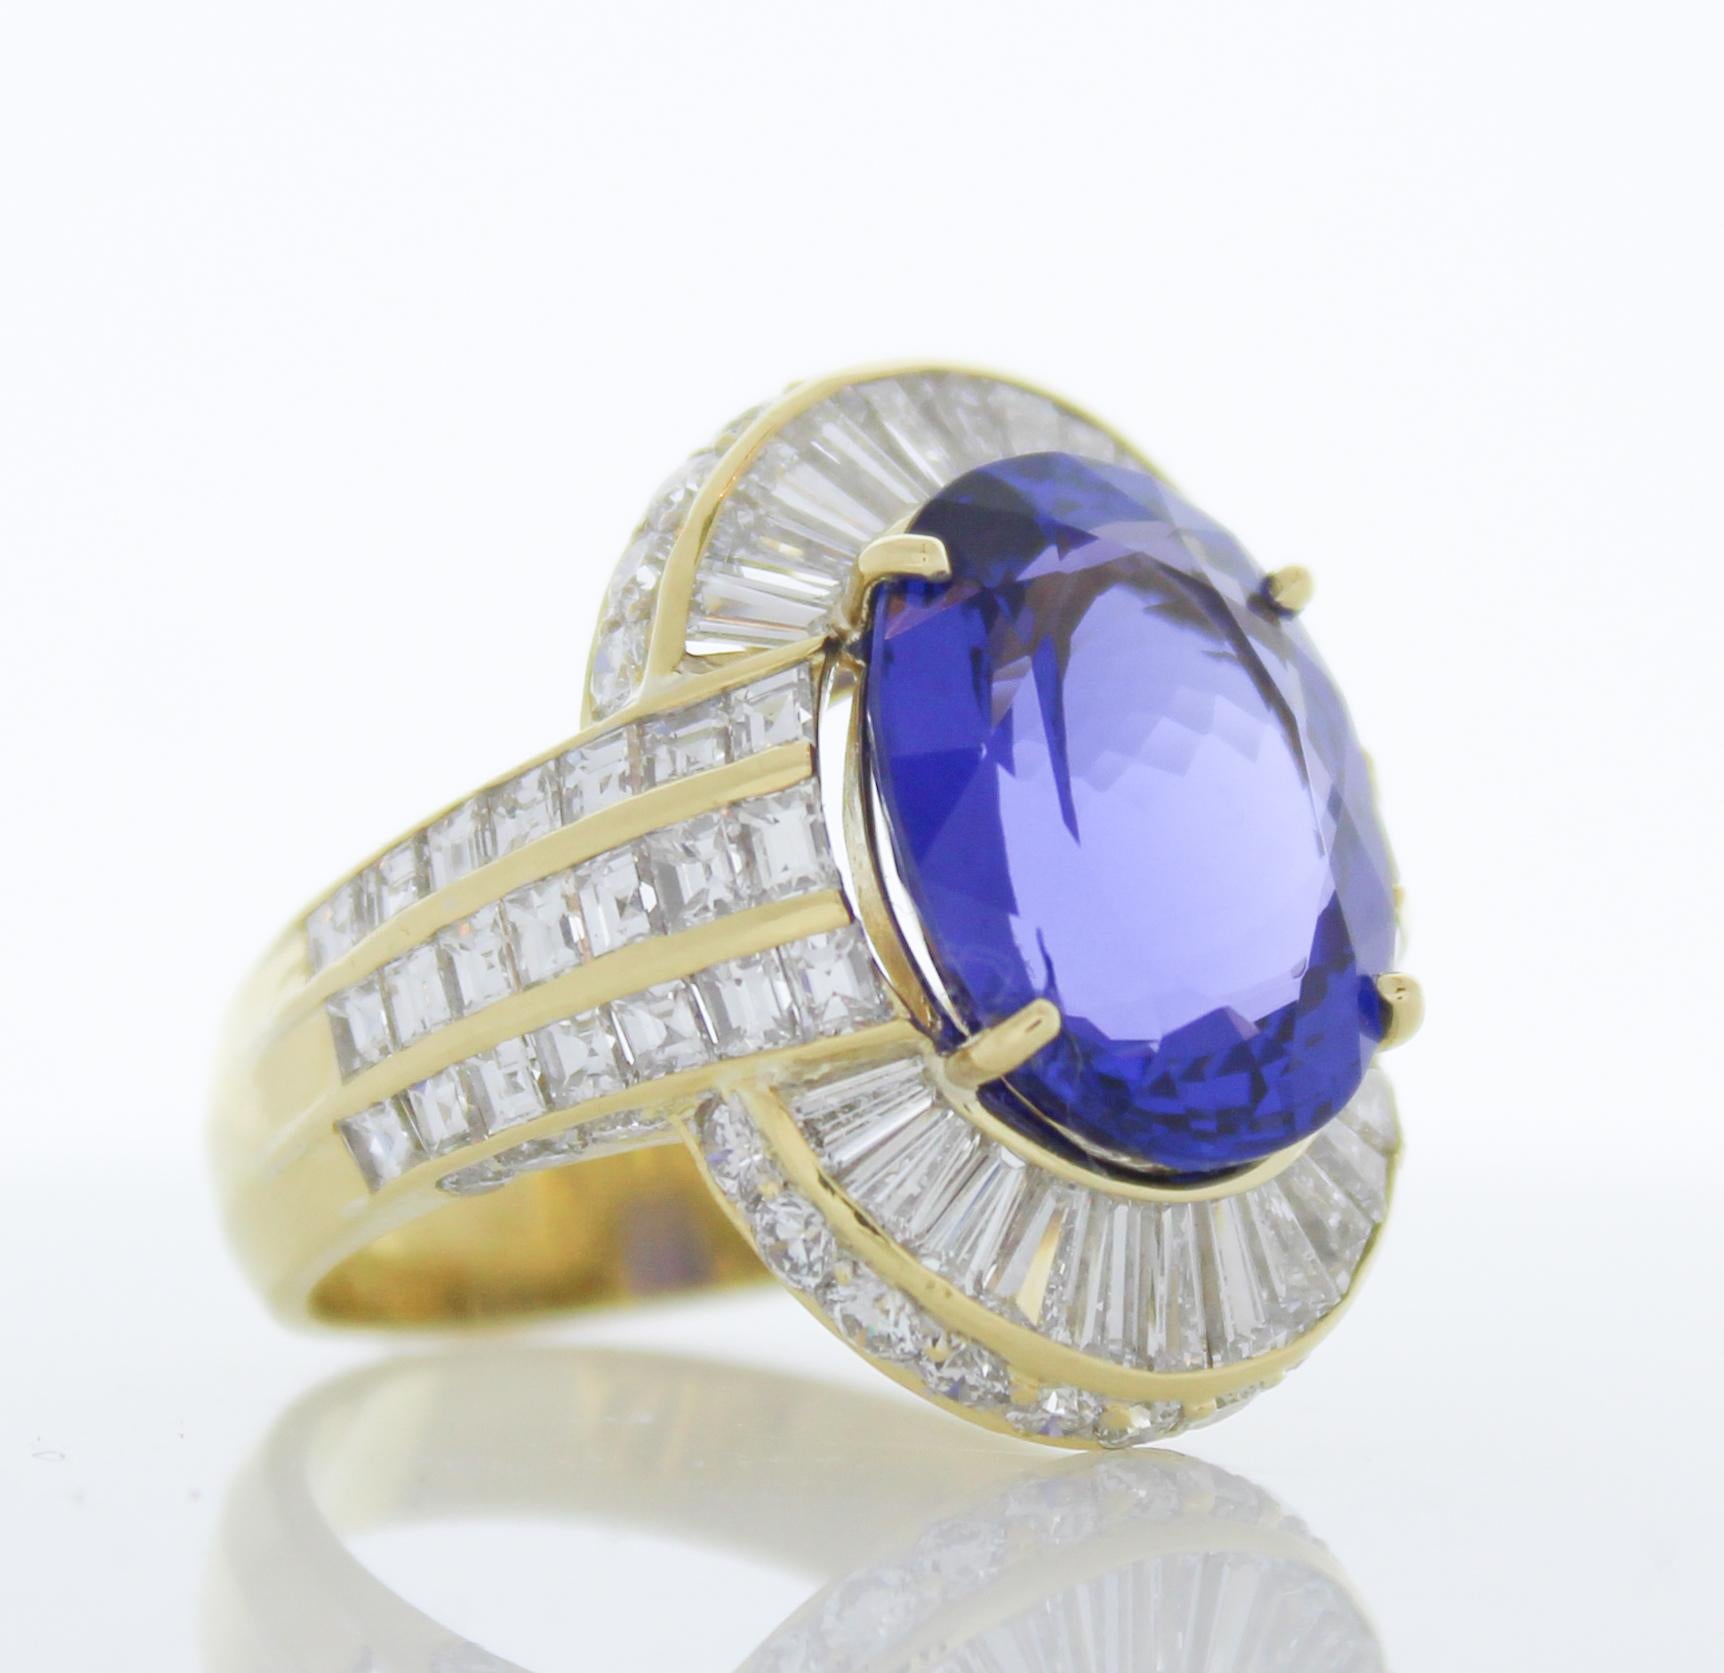 Contemporary 8.73 Carat Oval Tanzanite & Diamond Cocktail Ring in 18k Yellow Gold